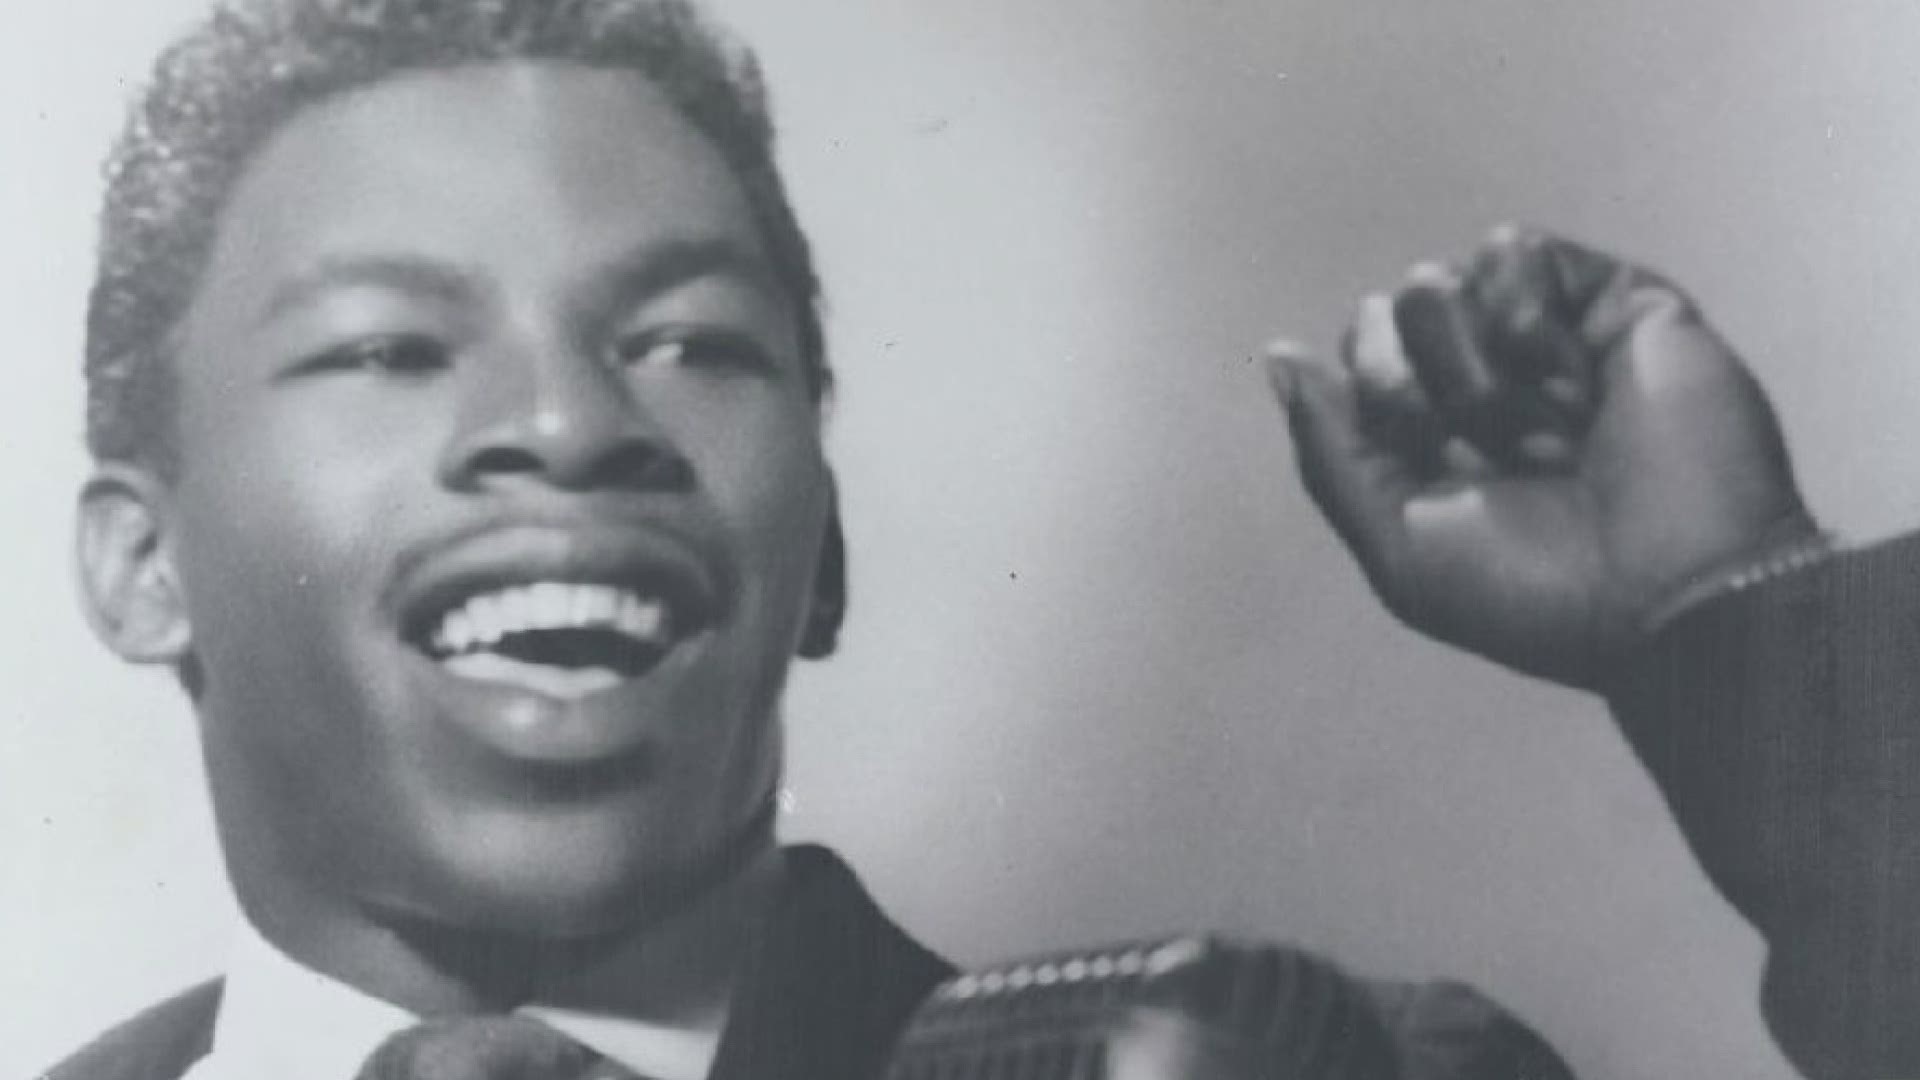 Rock & Roll Hall of Famer and Kenner native Lloyd Price died at the age of 88.